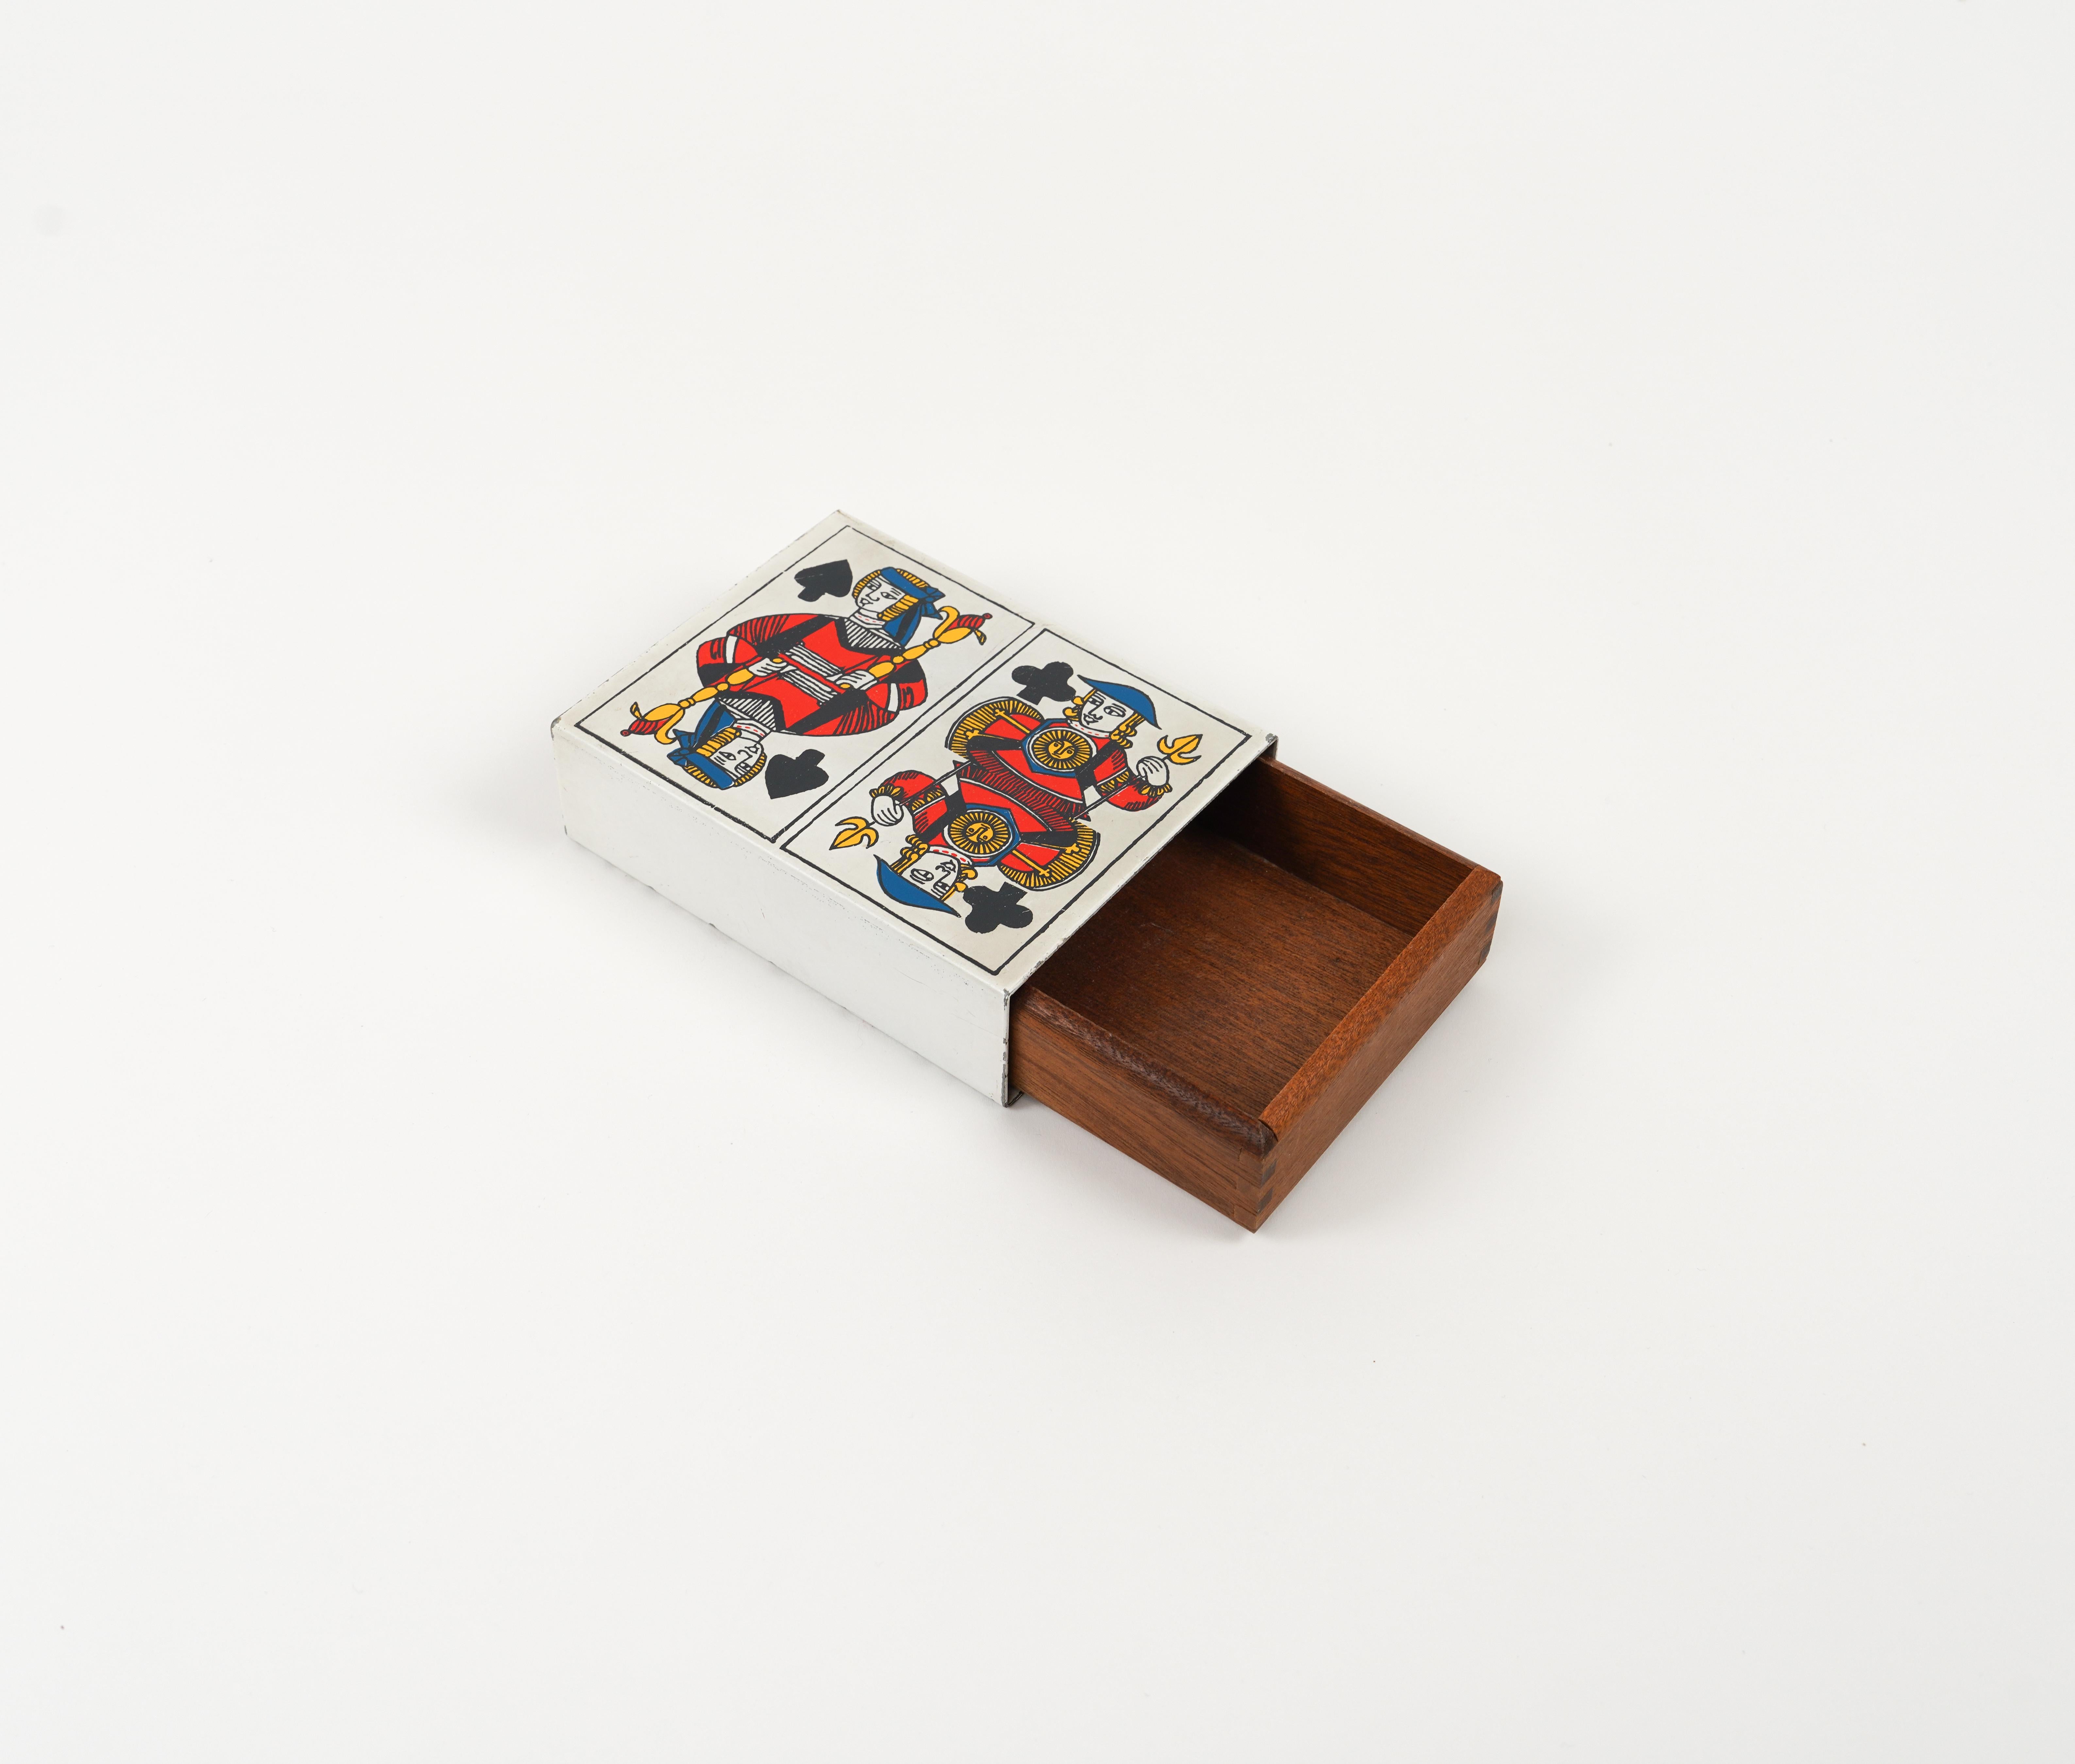 Mid-20th Century Midcentury Box in Enameled Metal and Wood by Piero Fornasetti, Italy 1960s